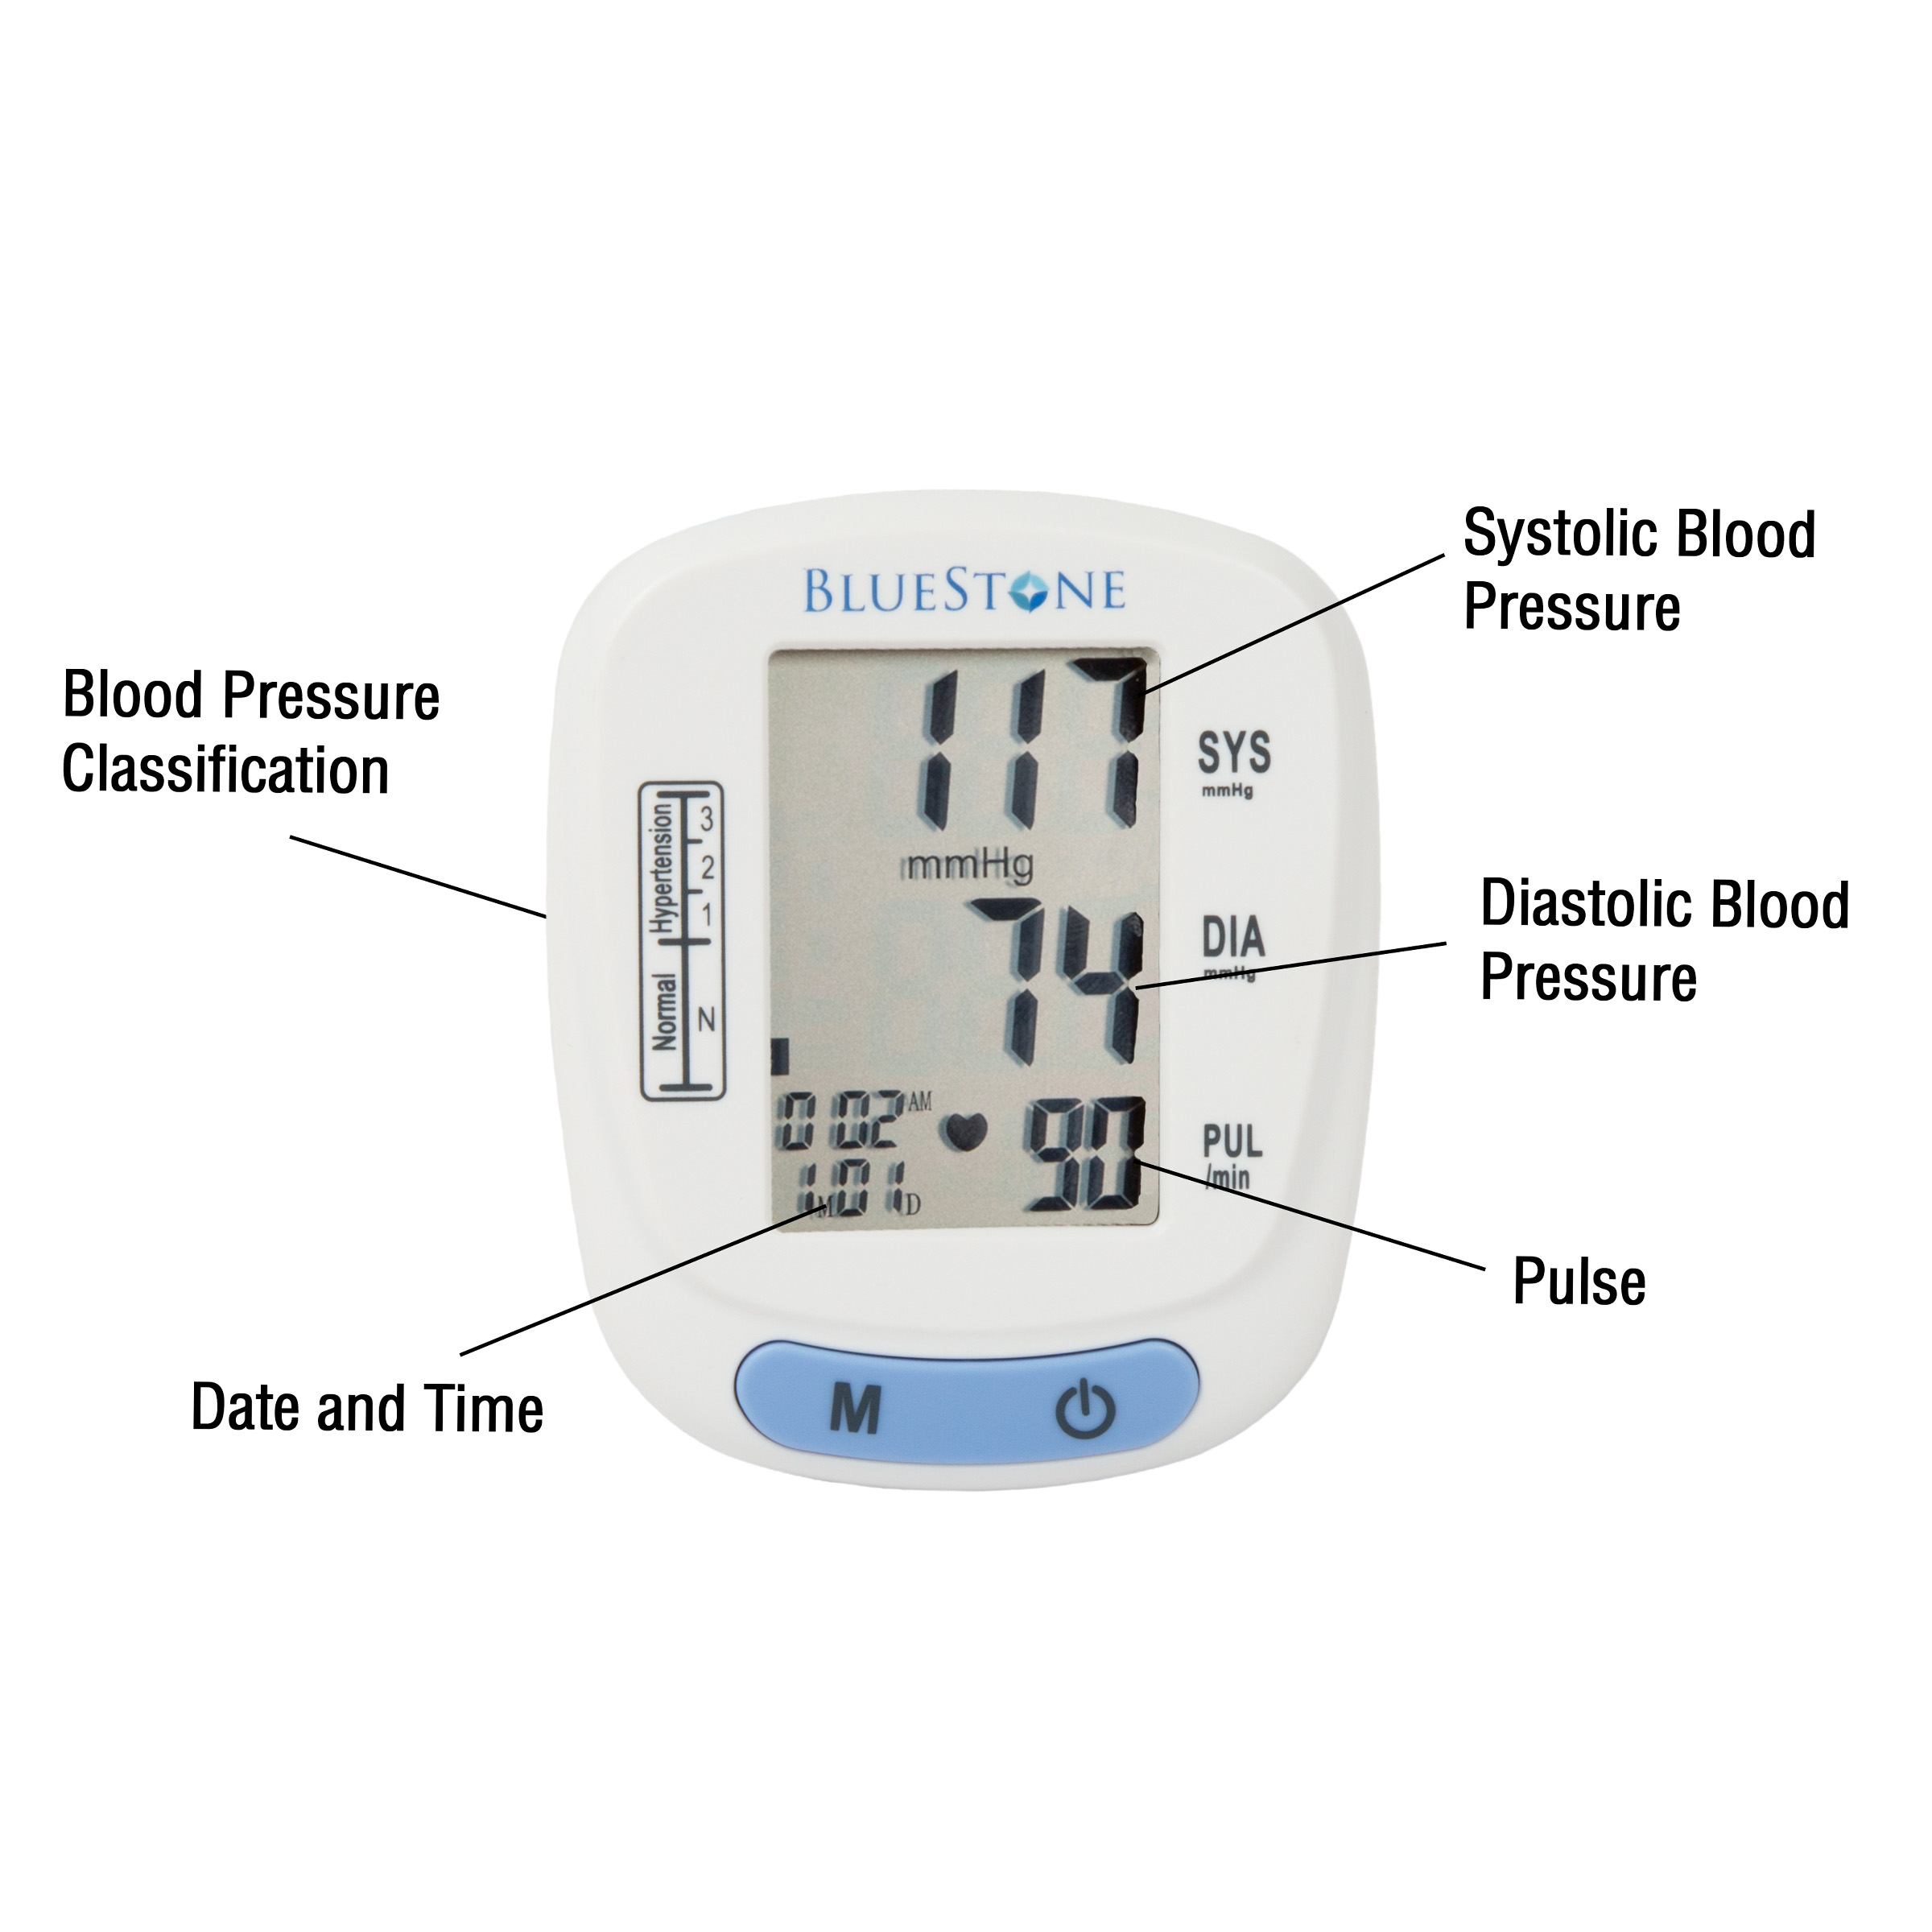 Blood Pressure Monitor With Heart Rate - Automatic Wrist Cuff Blood Pressure Machine With LCD Display Memory and Carrying Case by Bluestone - image 3 of 7